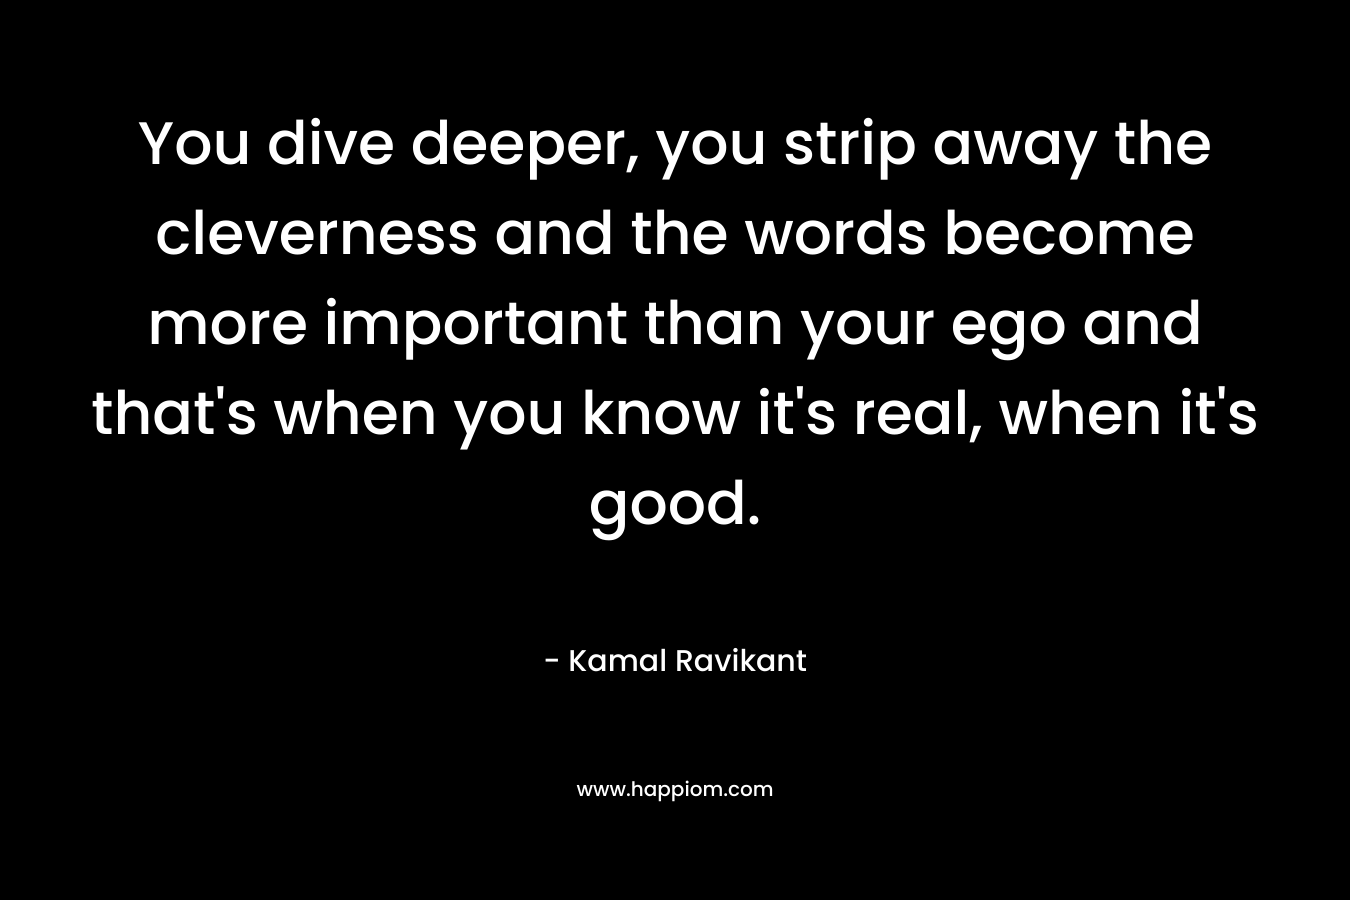 You dive deeper, you strip away the cleverness and the words become more important than your ego and that's when you know it's real, when it's good.